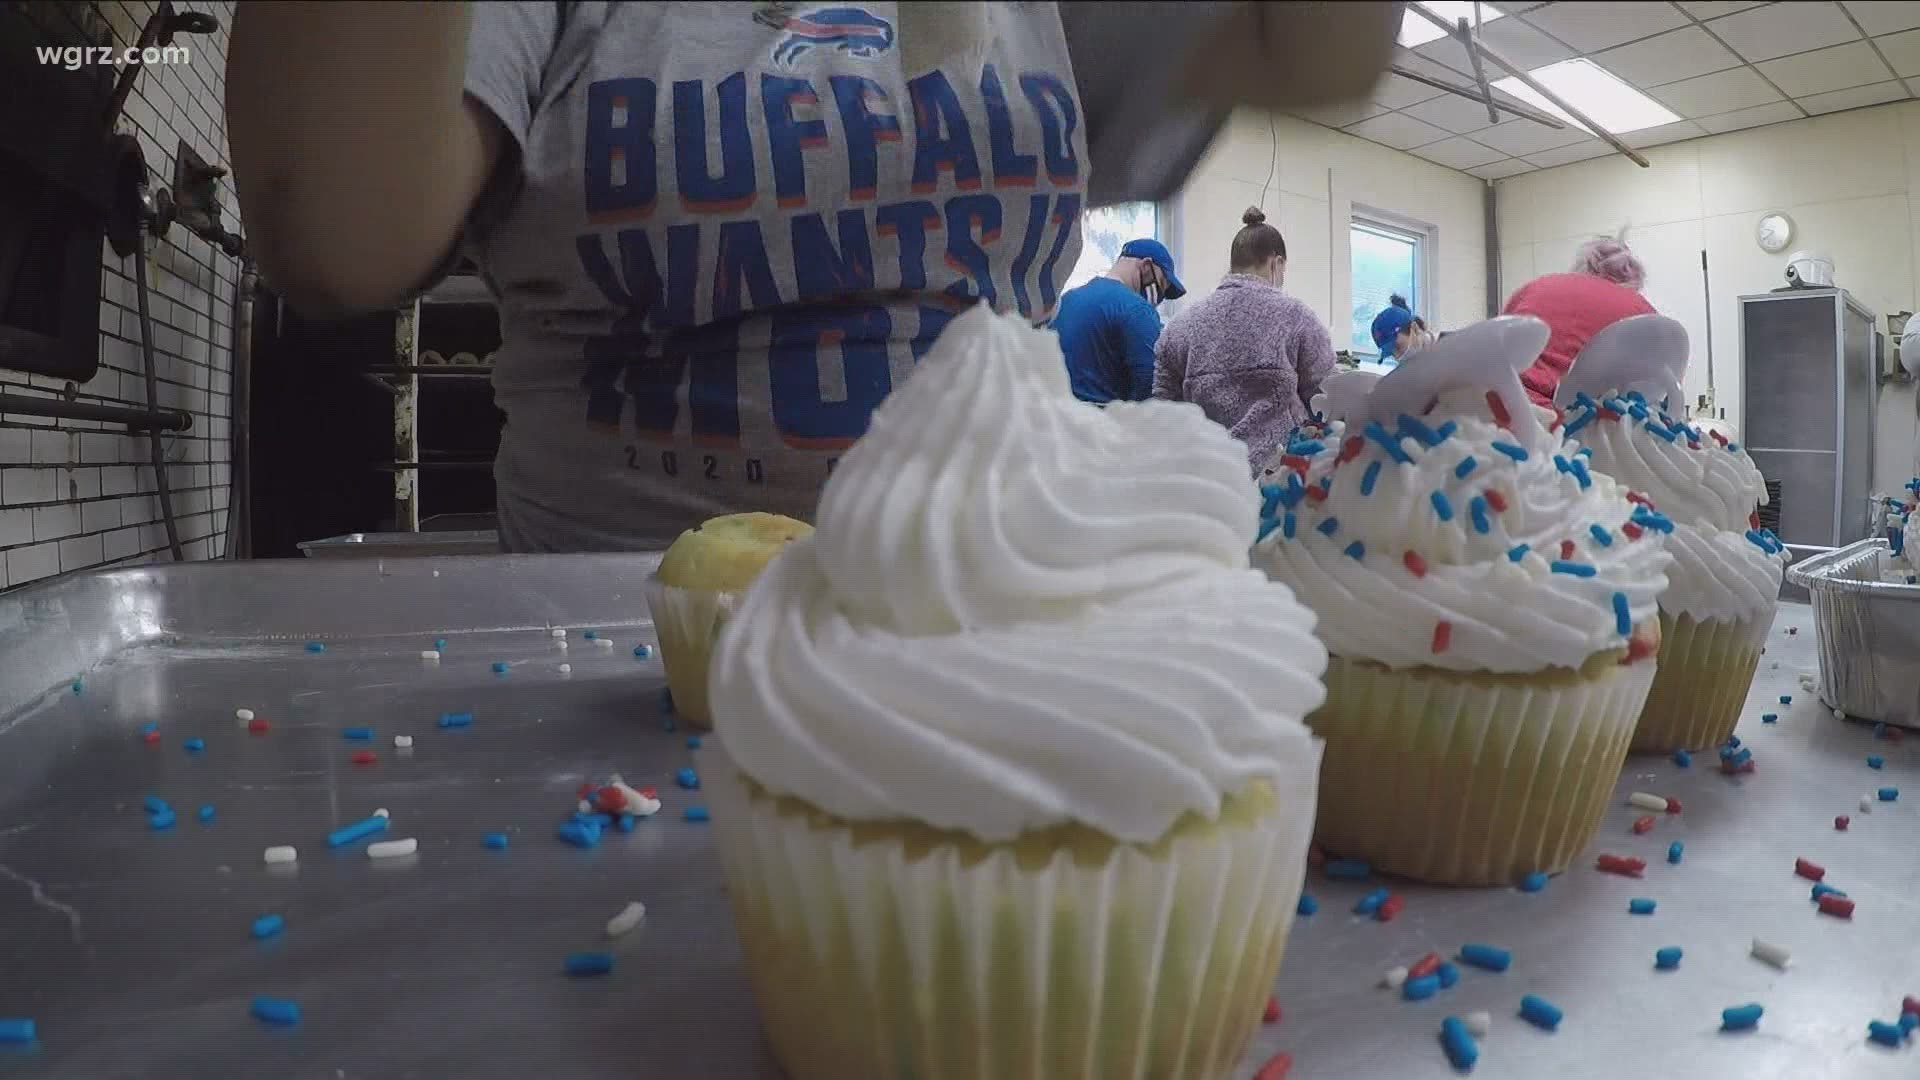 We know that Bills fans love to plan out some nice food and drinks for game days. 2 On Your Side shows us this playoff run has meant big business for some bakeries.